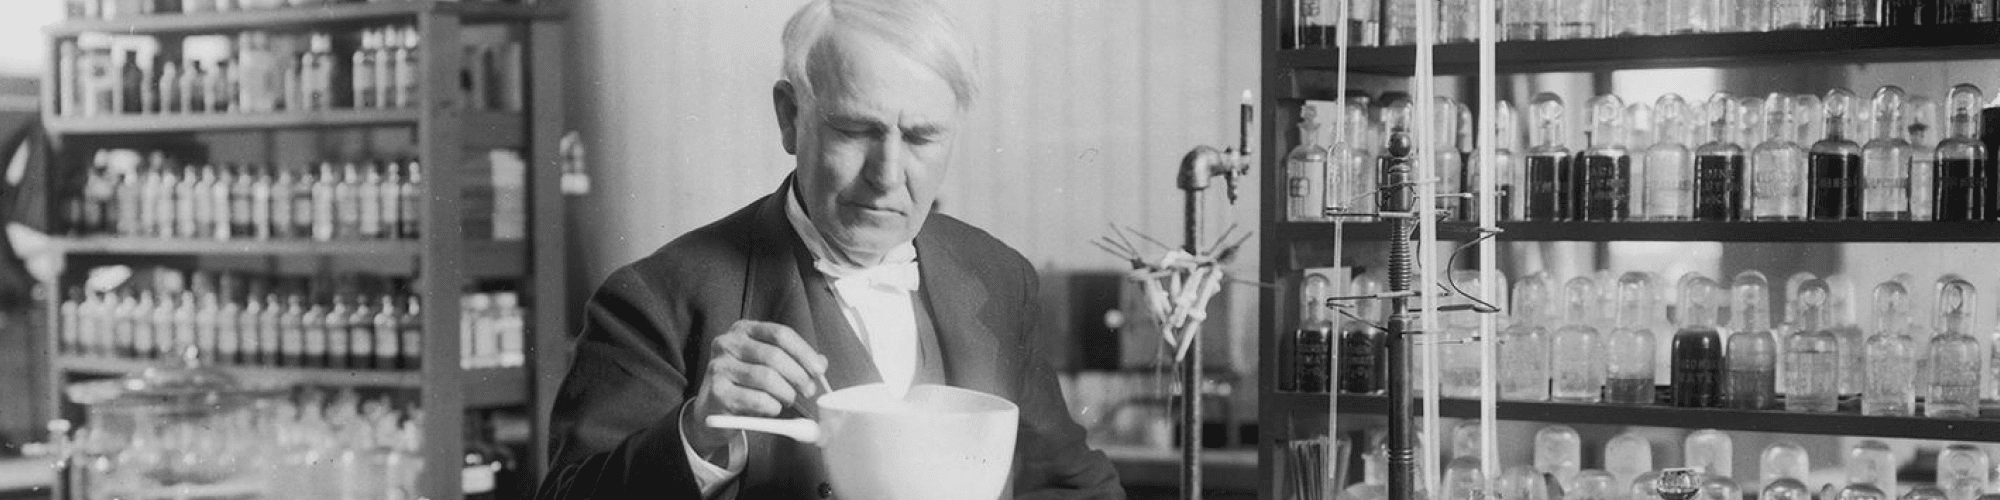 Thomas Edison in his lab conducting an experiment with beakers.